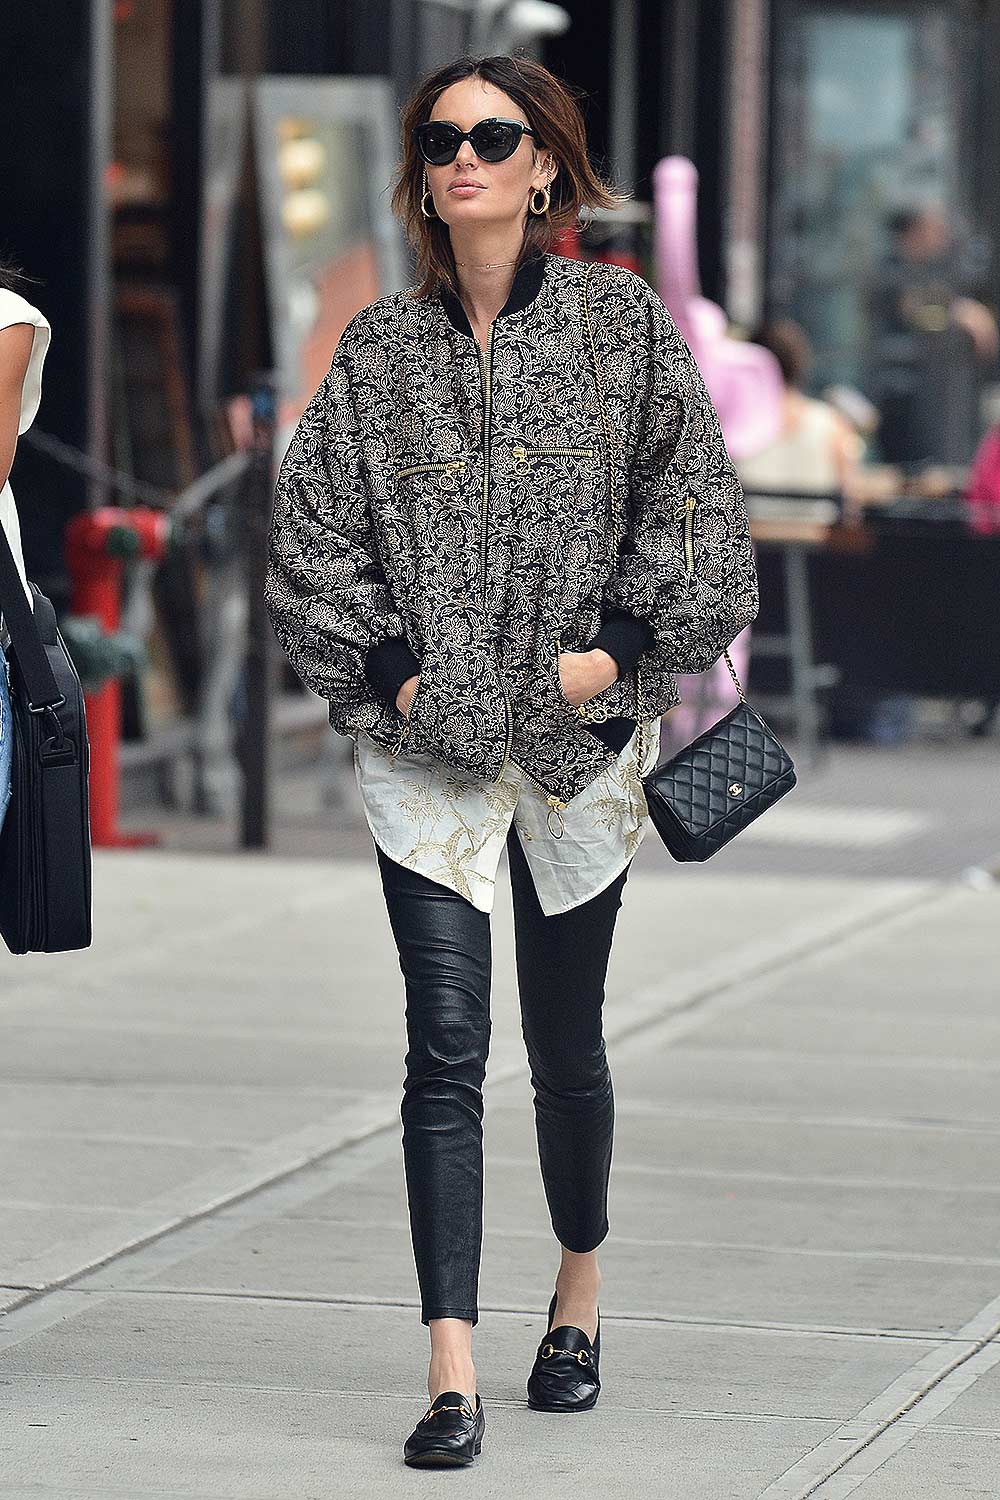 Nicole Trunfio is spotted out in New York City